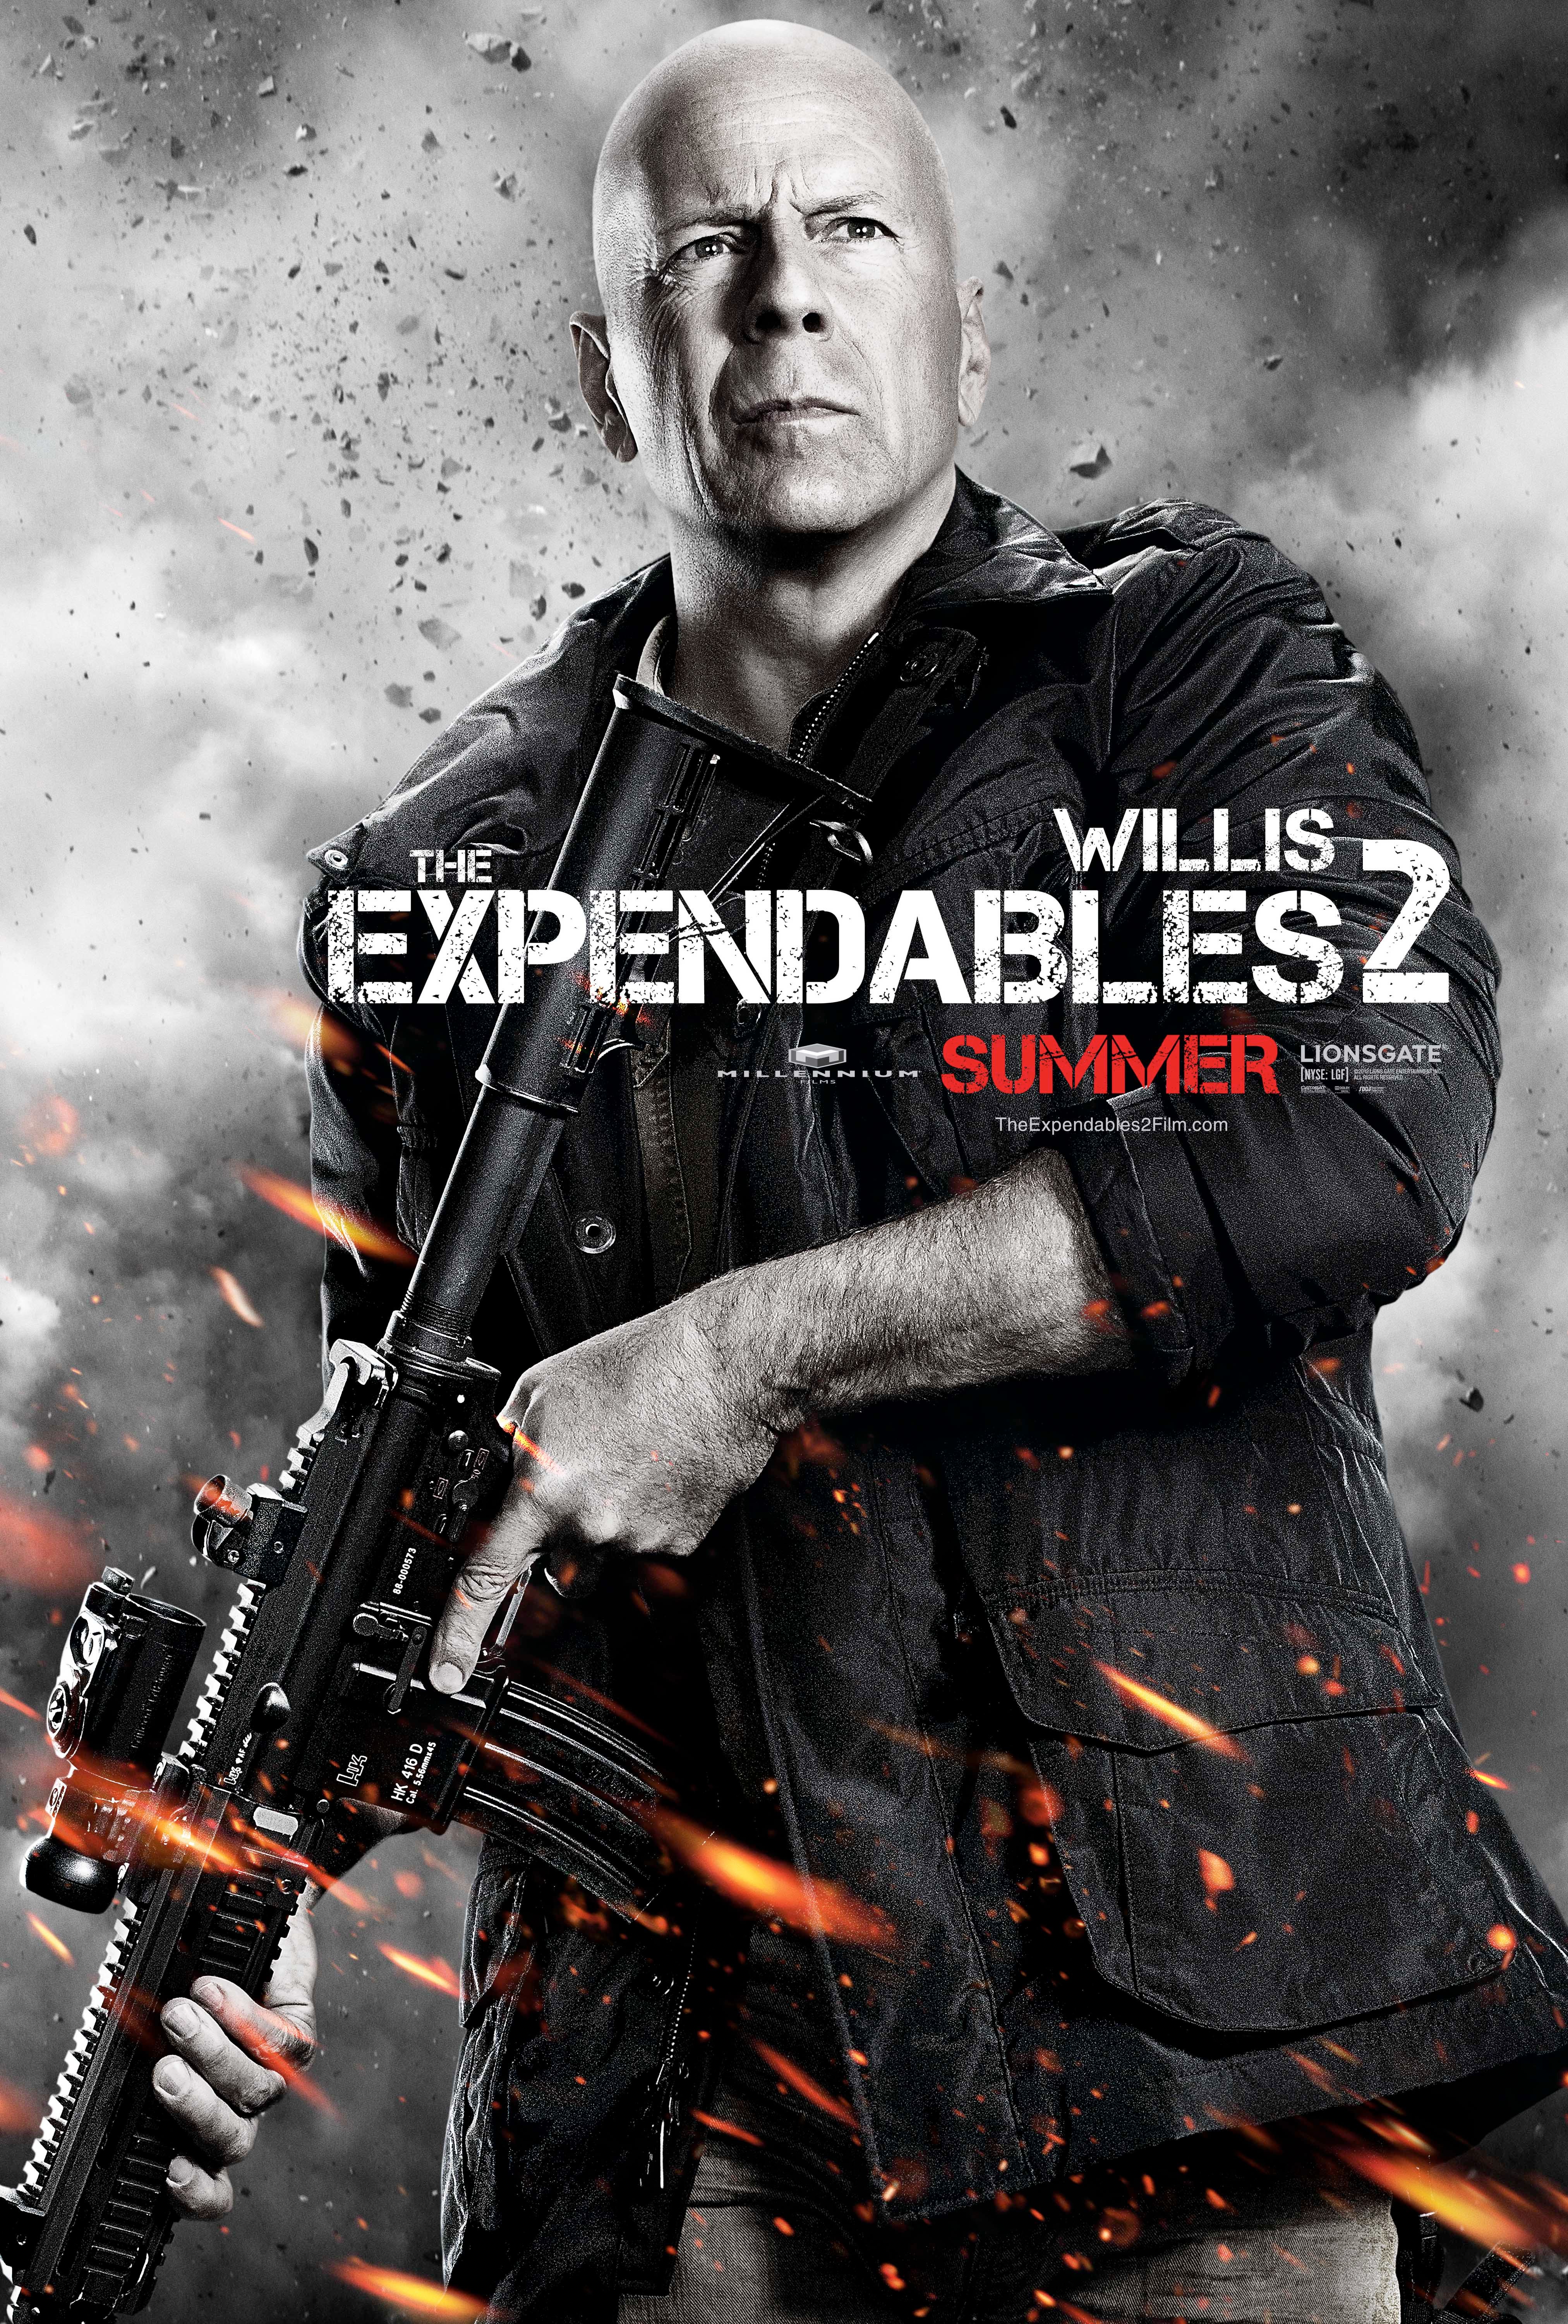 The Expendables 2 Character Poser #4